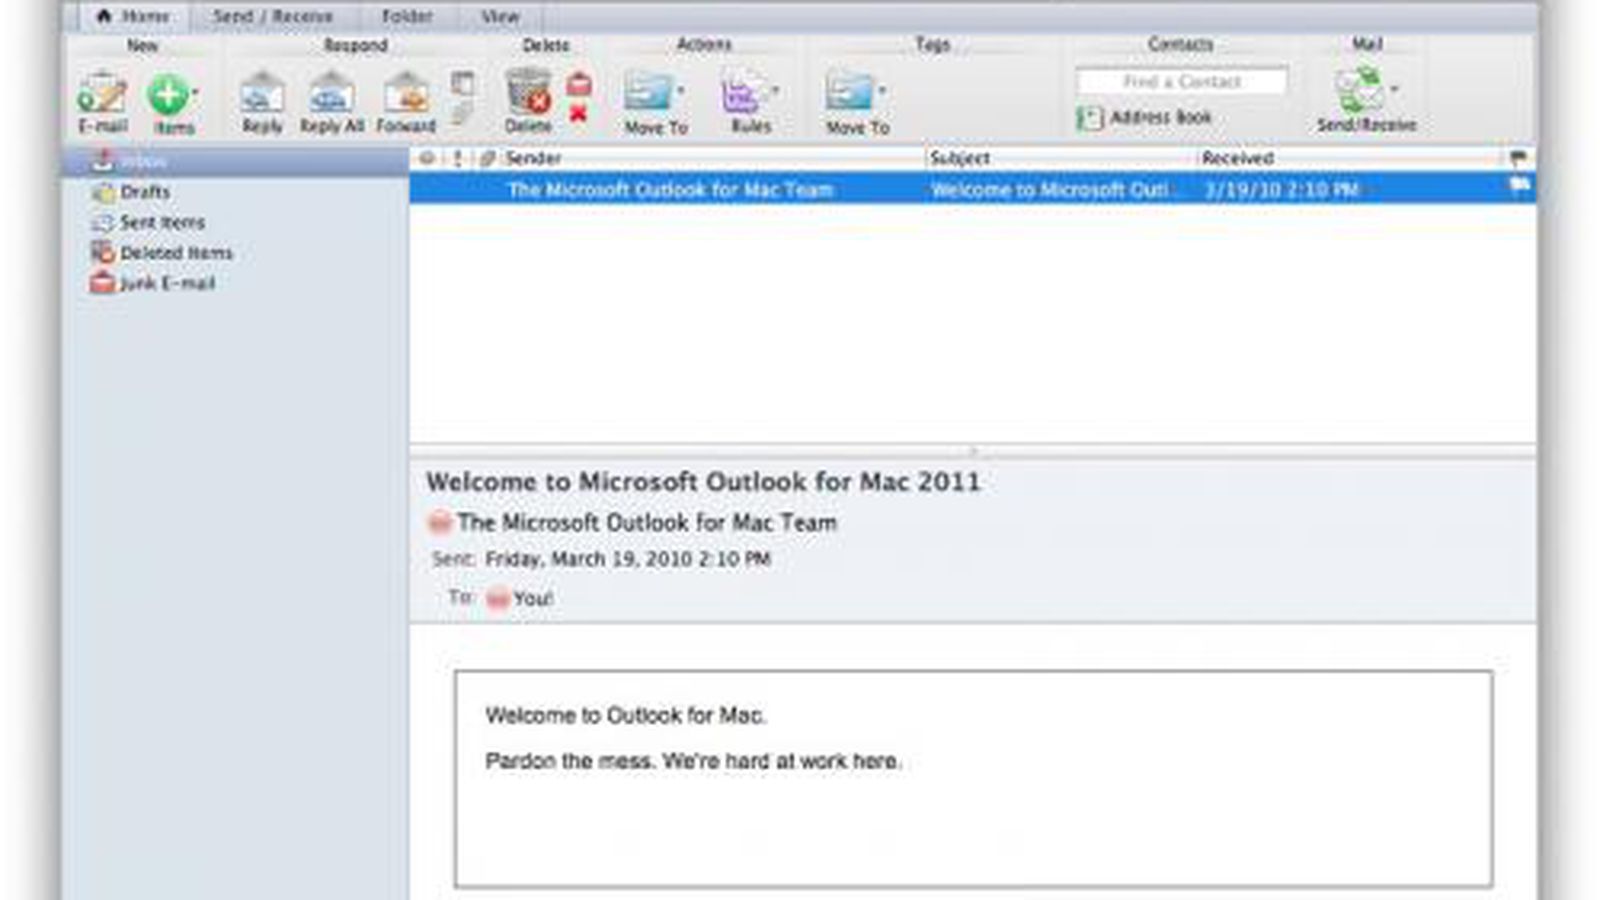 is there a mini toolbar for word for mac 2011